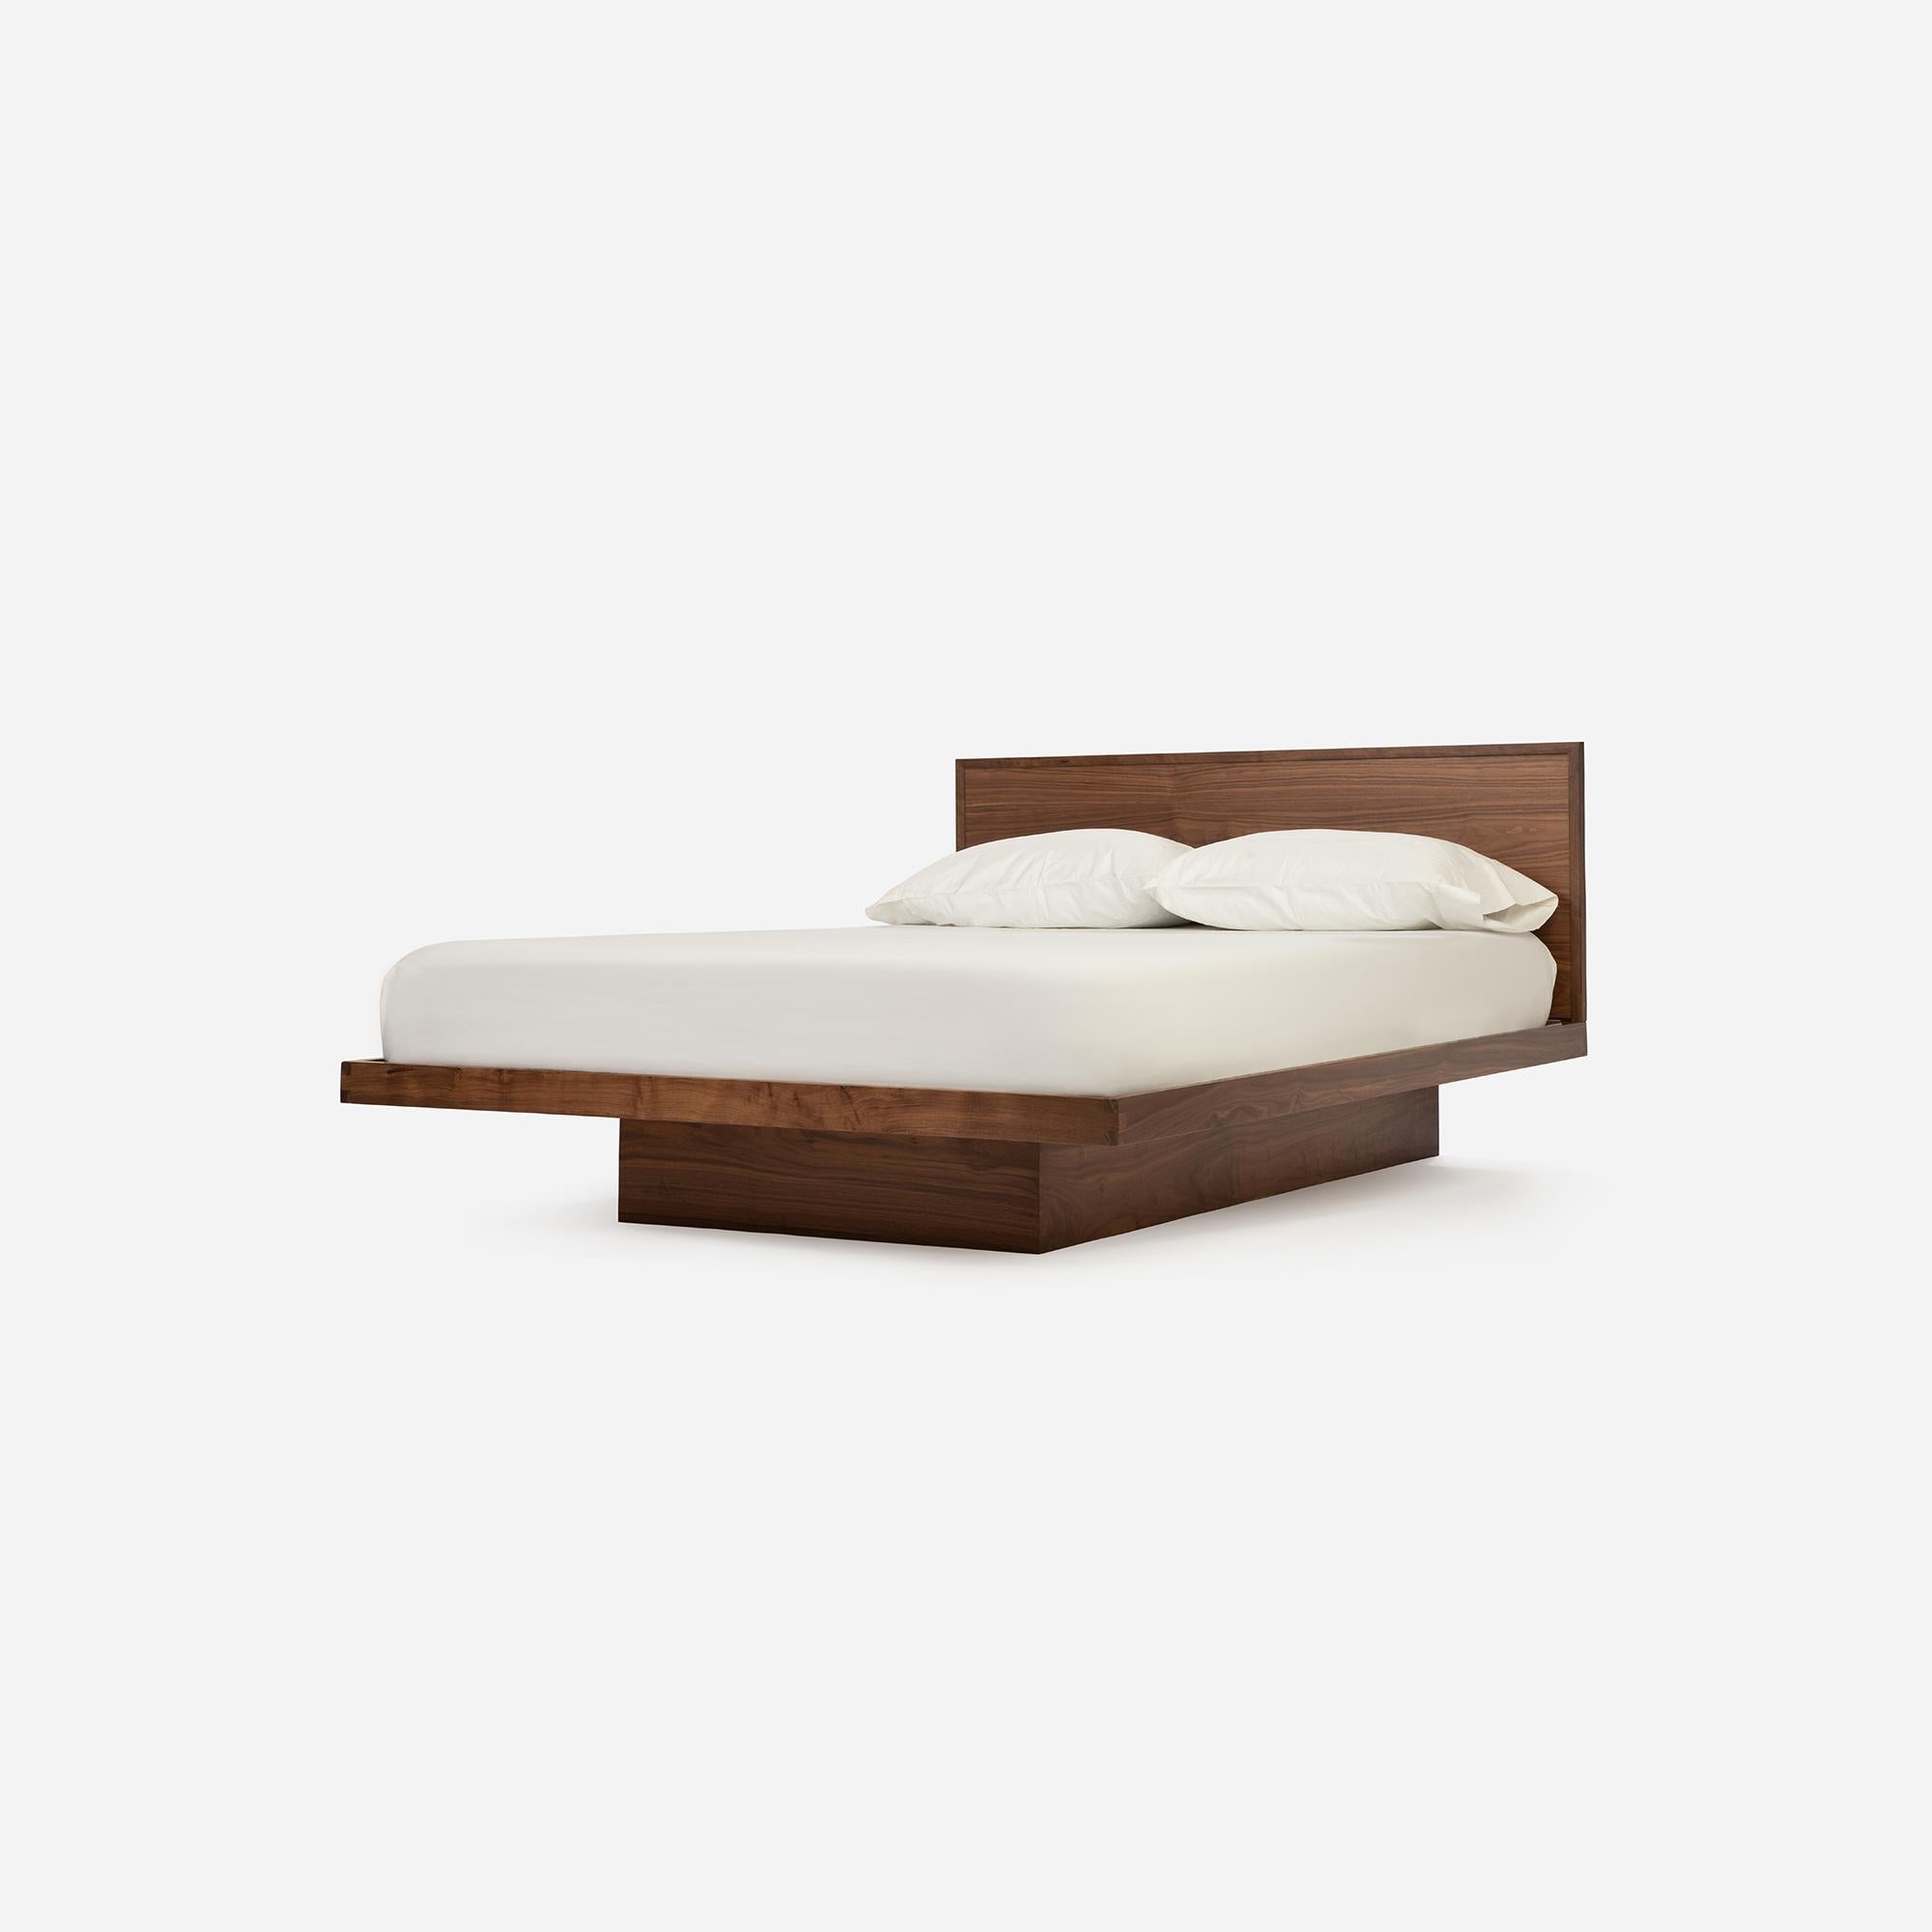 Mid-Century Modern Floating Platform Bed with Headboard in Walnut by Mel Smilow For Sale